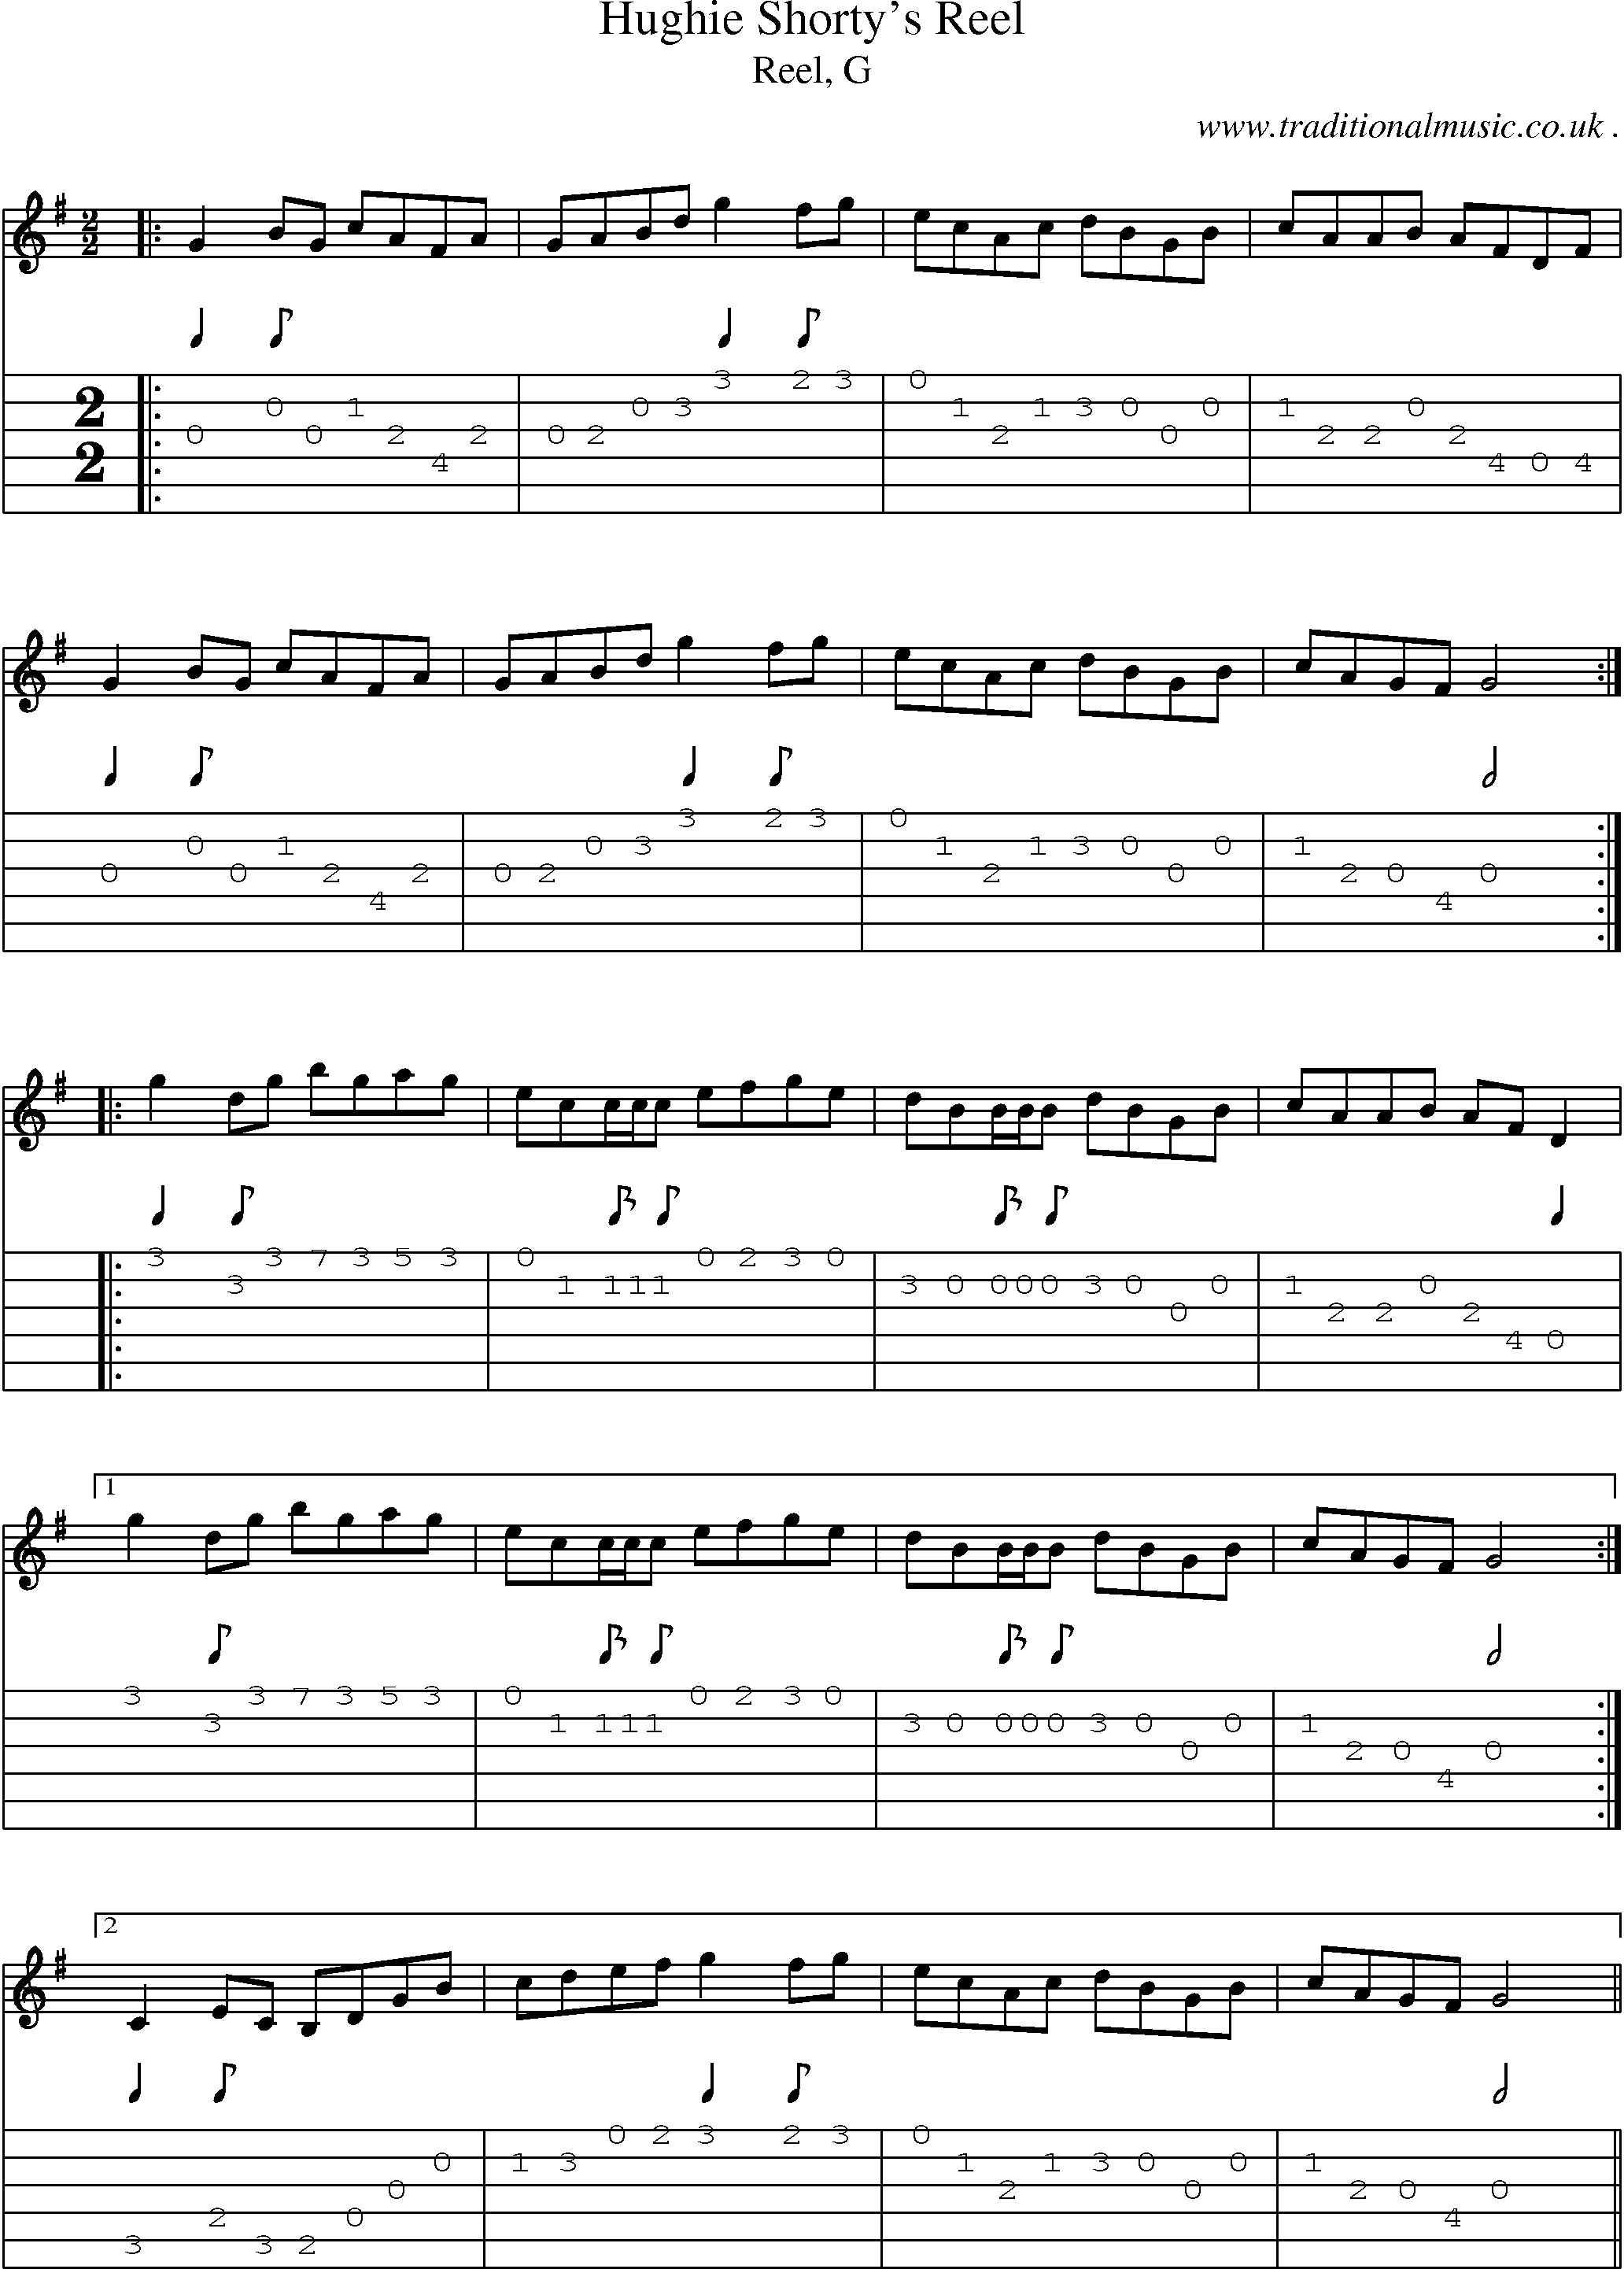 Sheet-music  score, Chords and Guitar Tabs for Hughie Shortys Reel